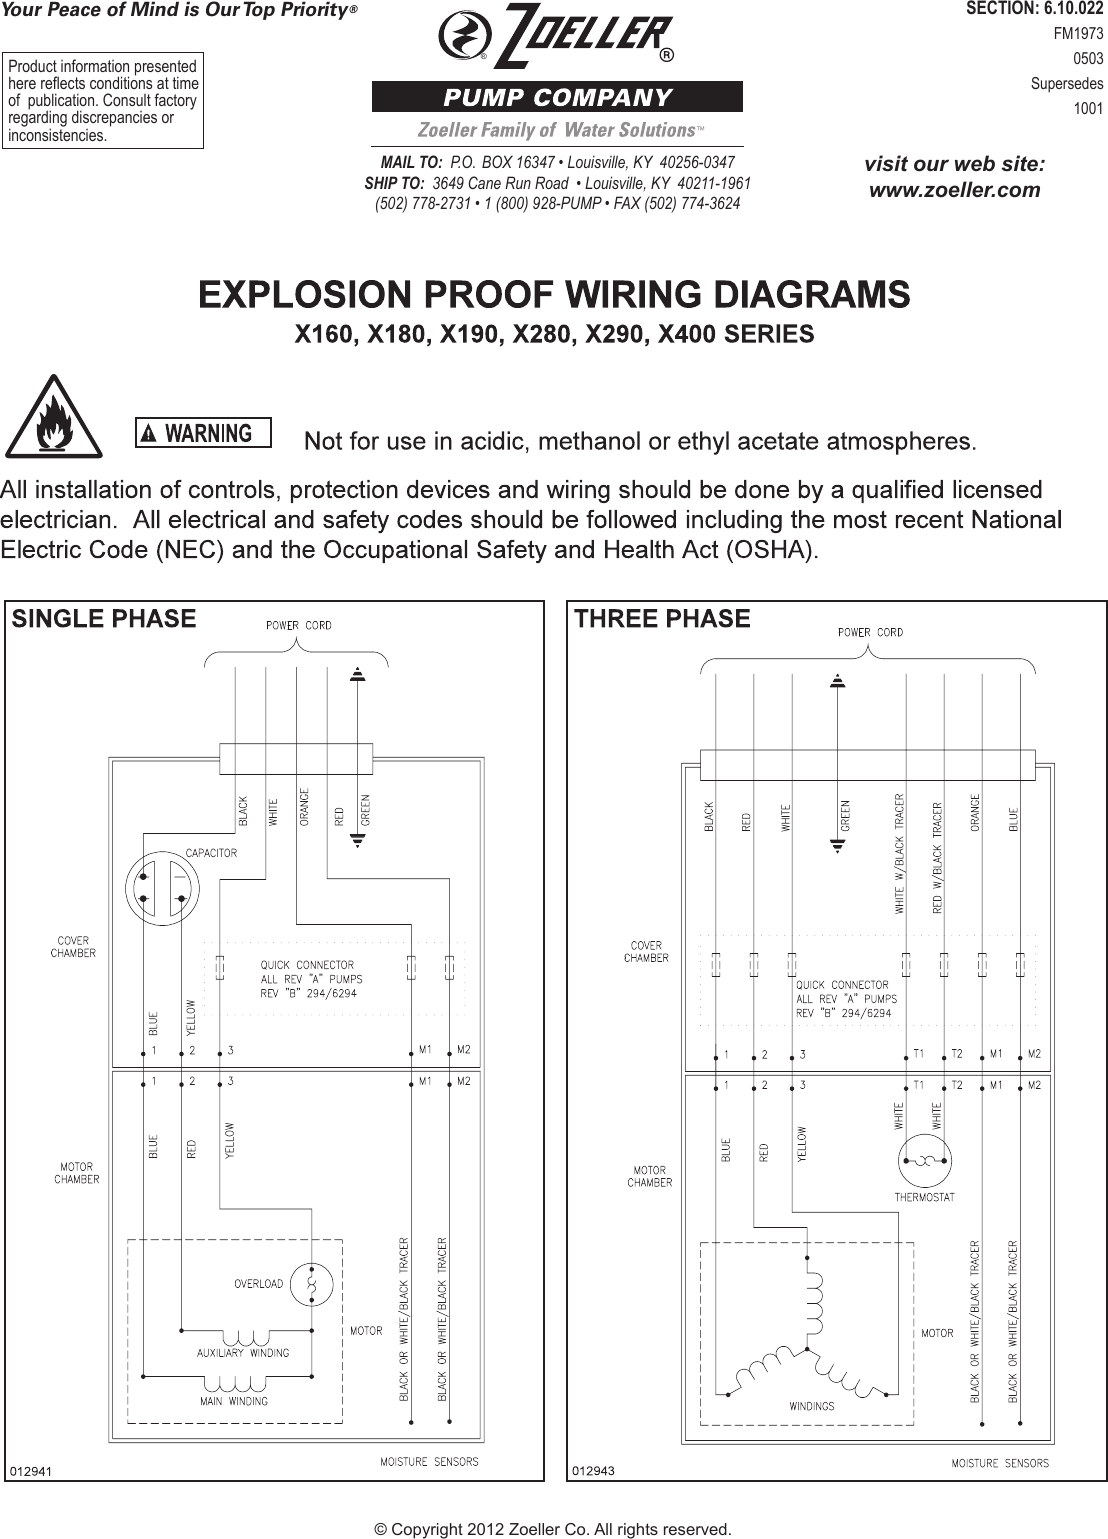 Page 1 of 2 - 3632 4 Zoeller X190 Explosion Proof Wiring Diagram User Manual